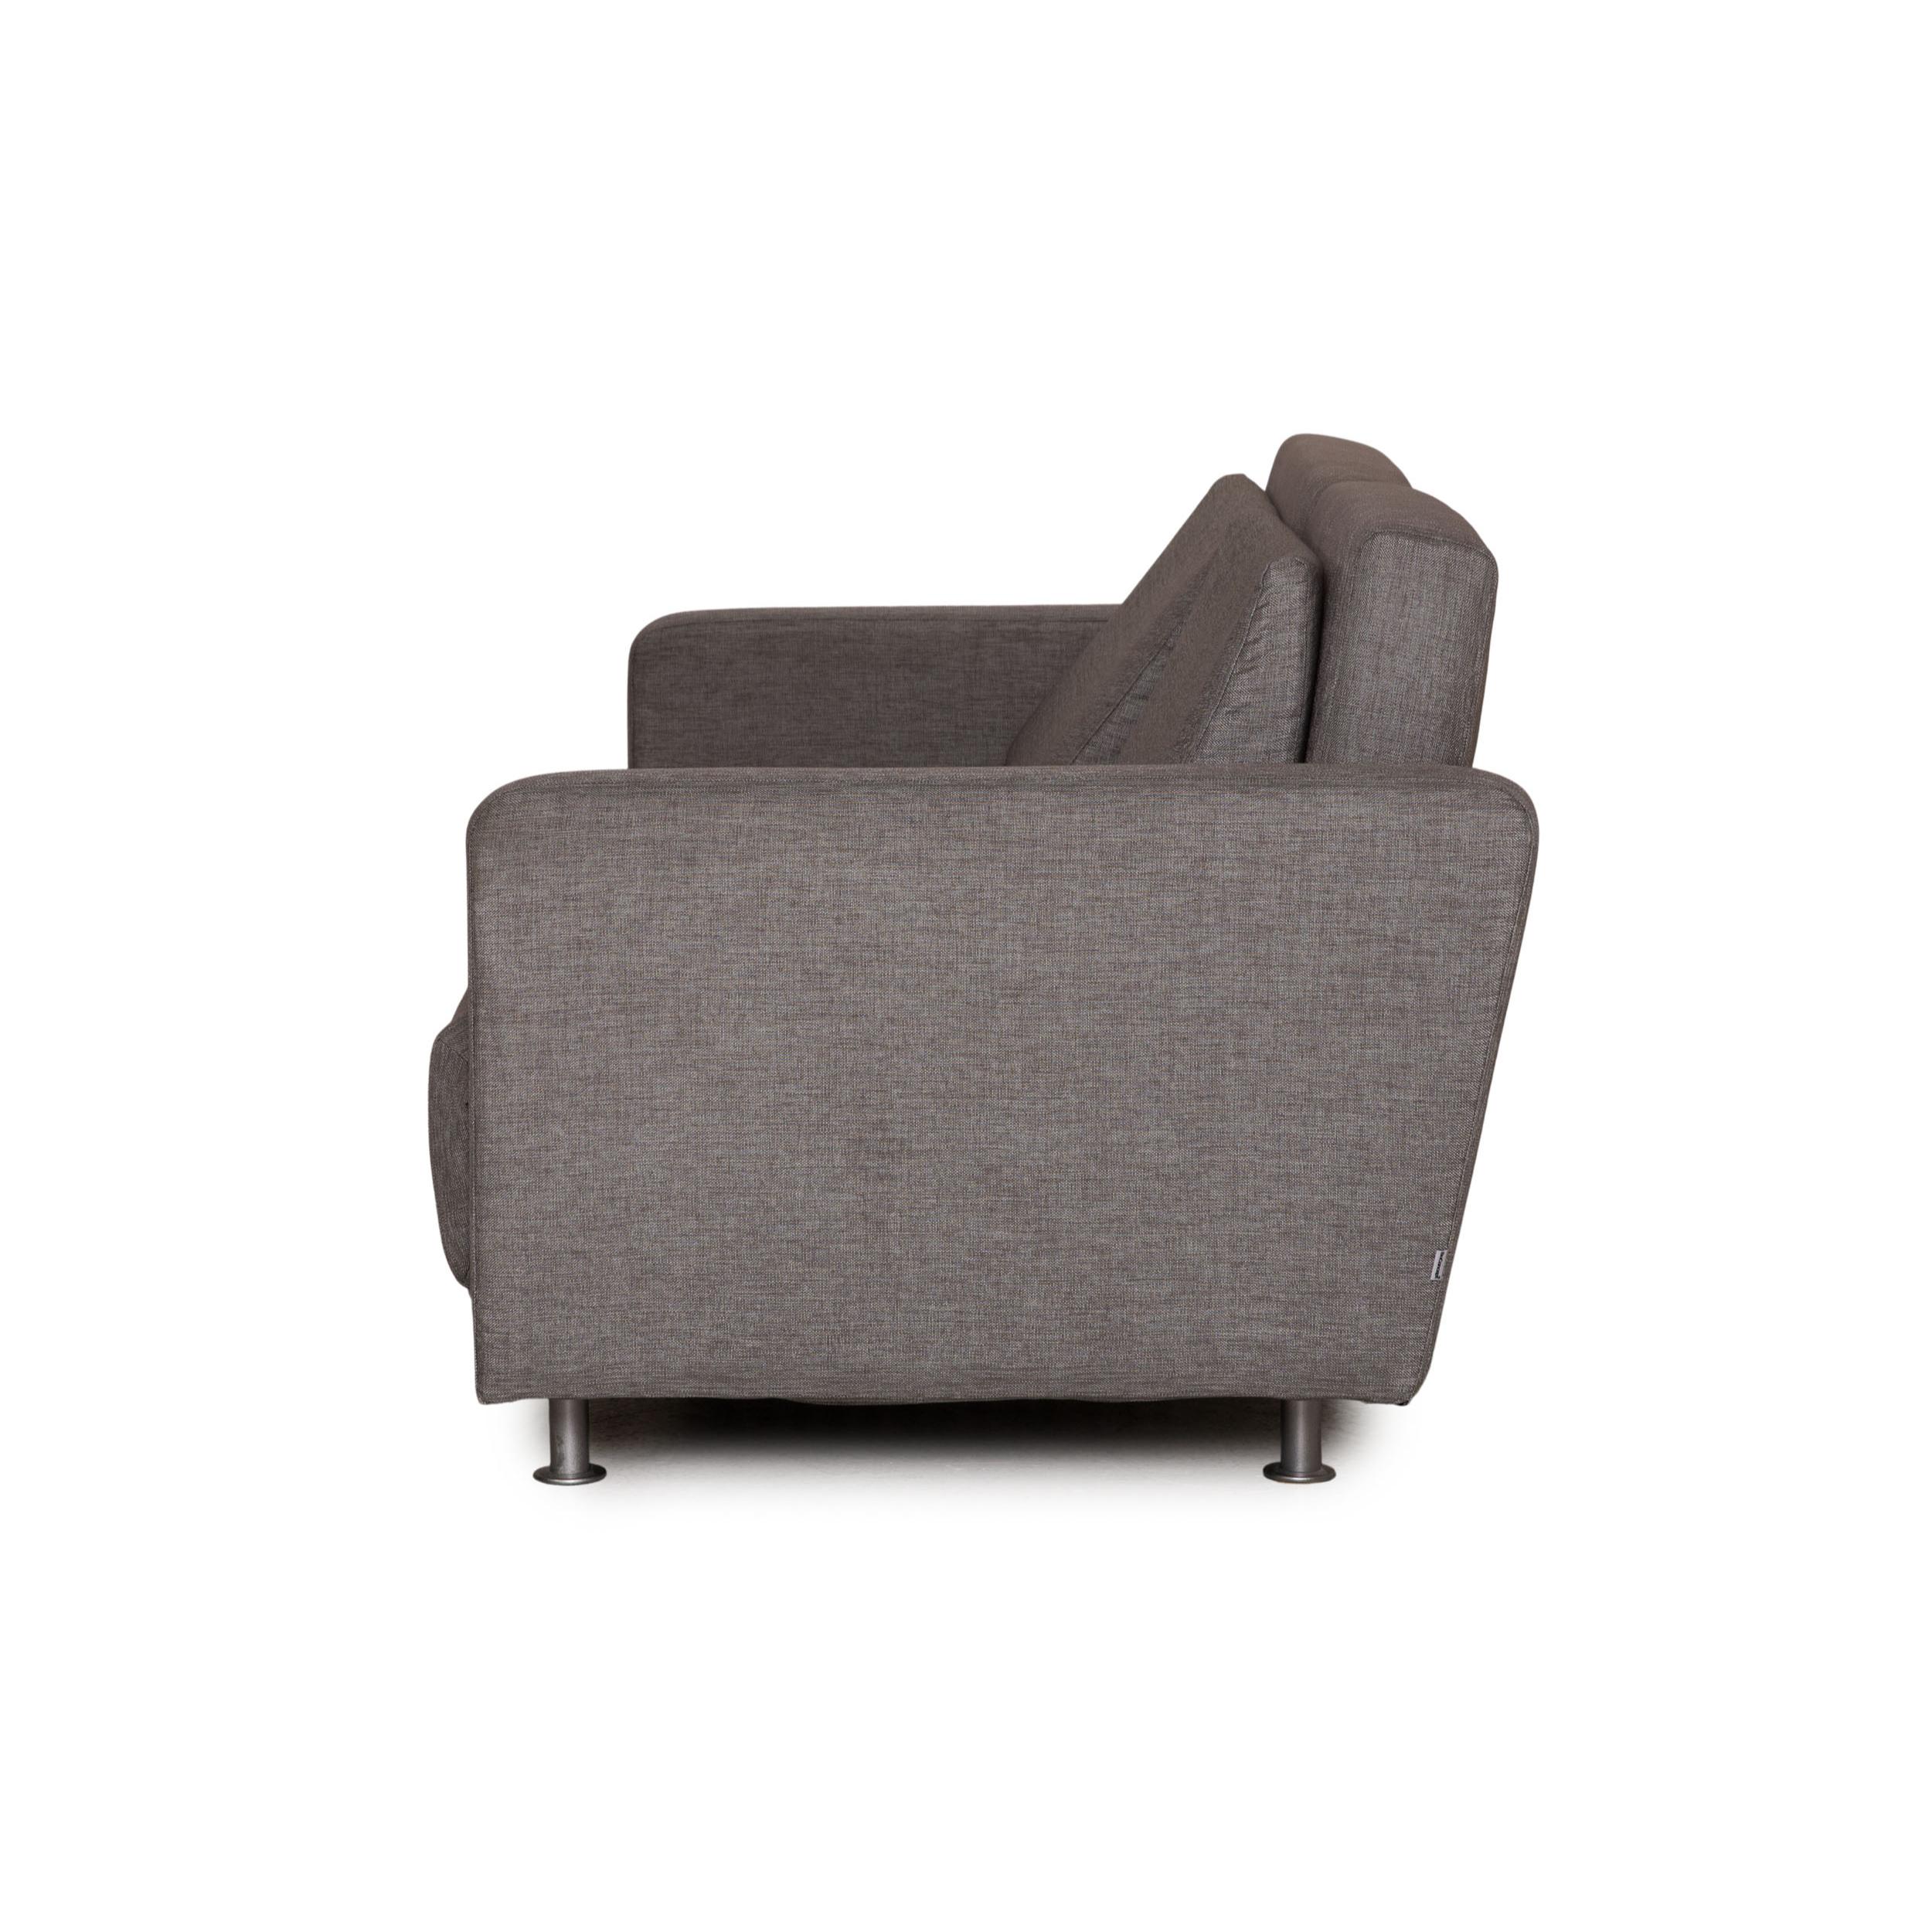 BoConcept Melo Sofa Fabric Gray Two-Seater Couch Function Sleeping Function 6